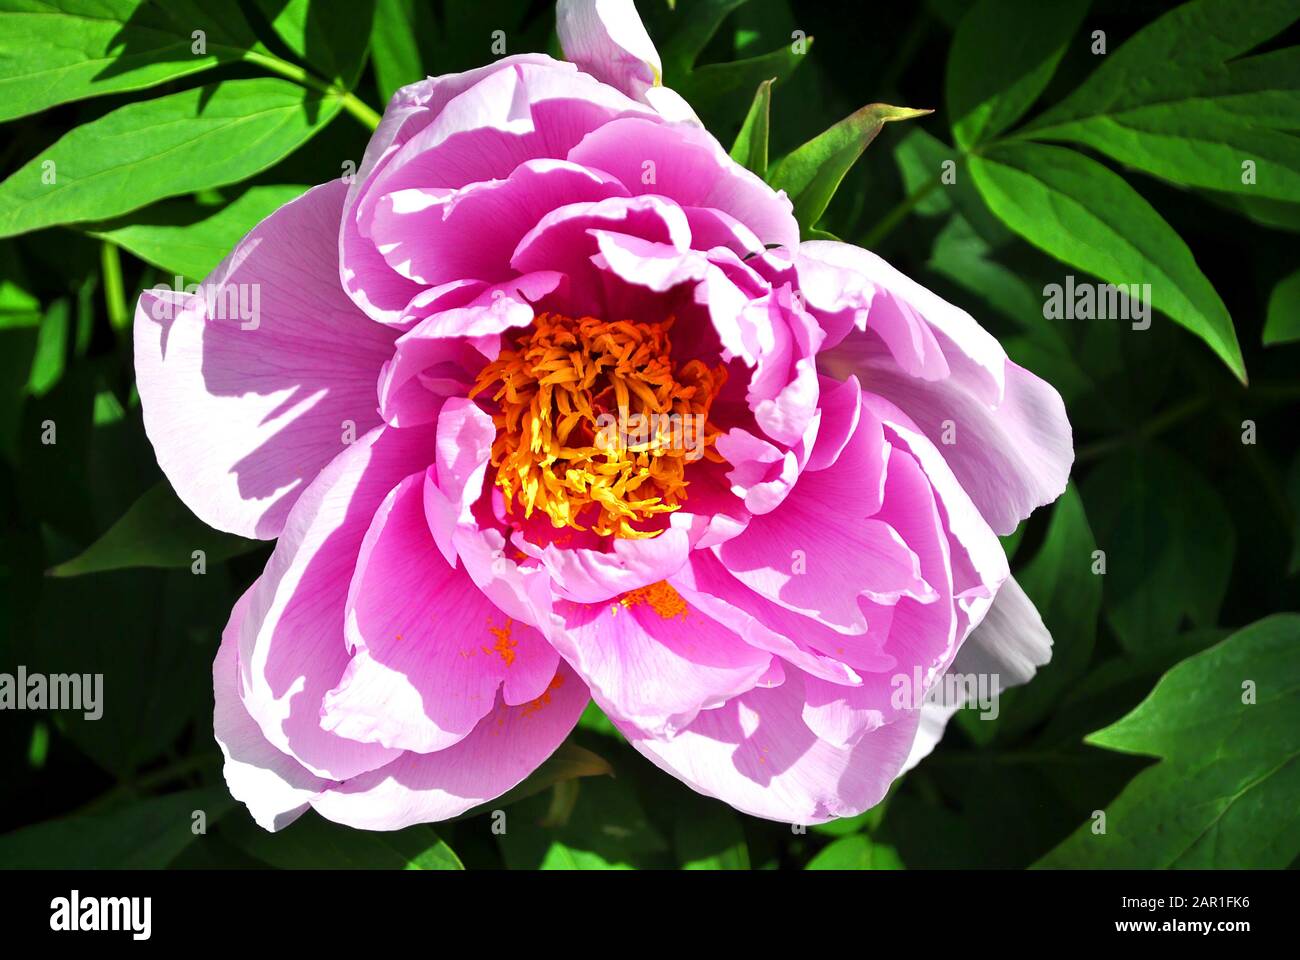 Bright pink peony flower, close up detail, soft green blurry leaves background Stock Photo